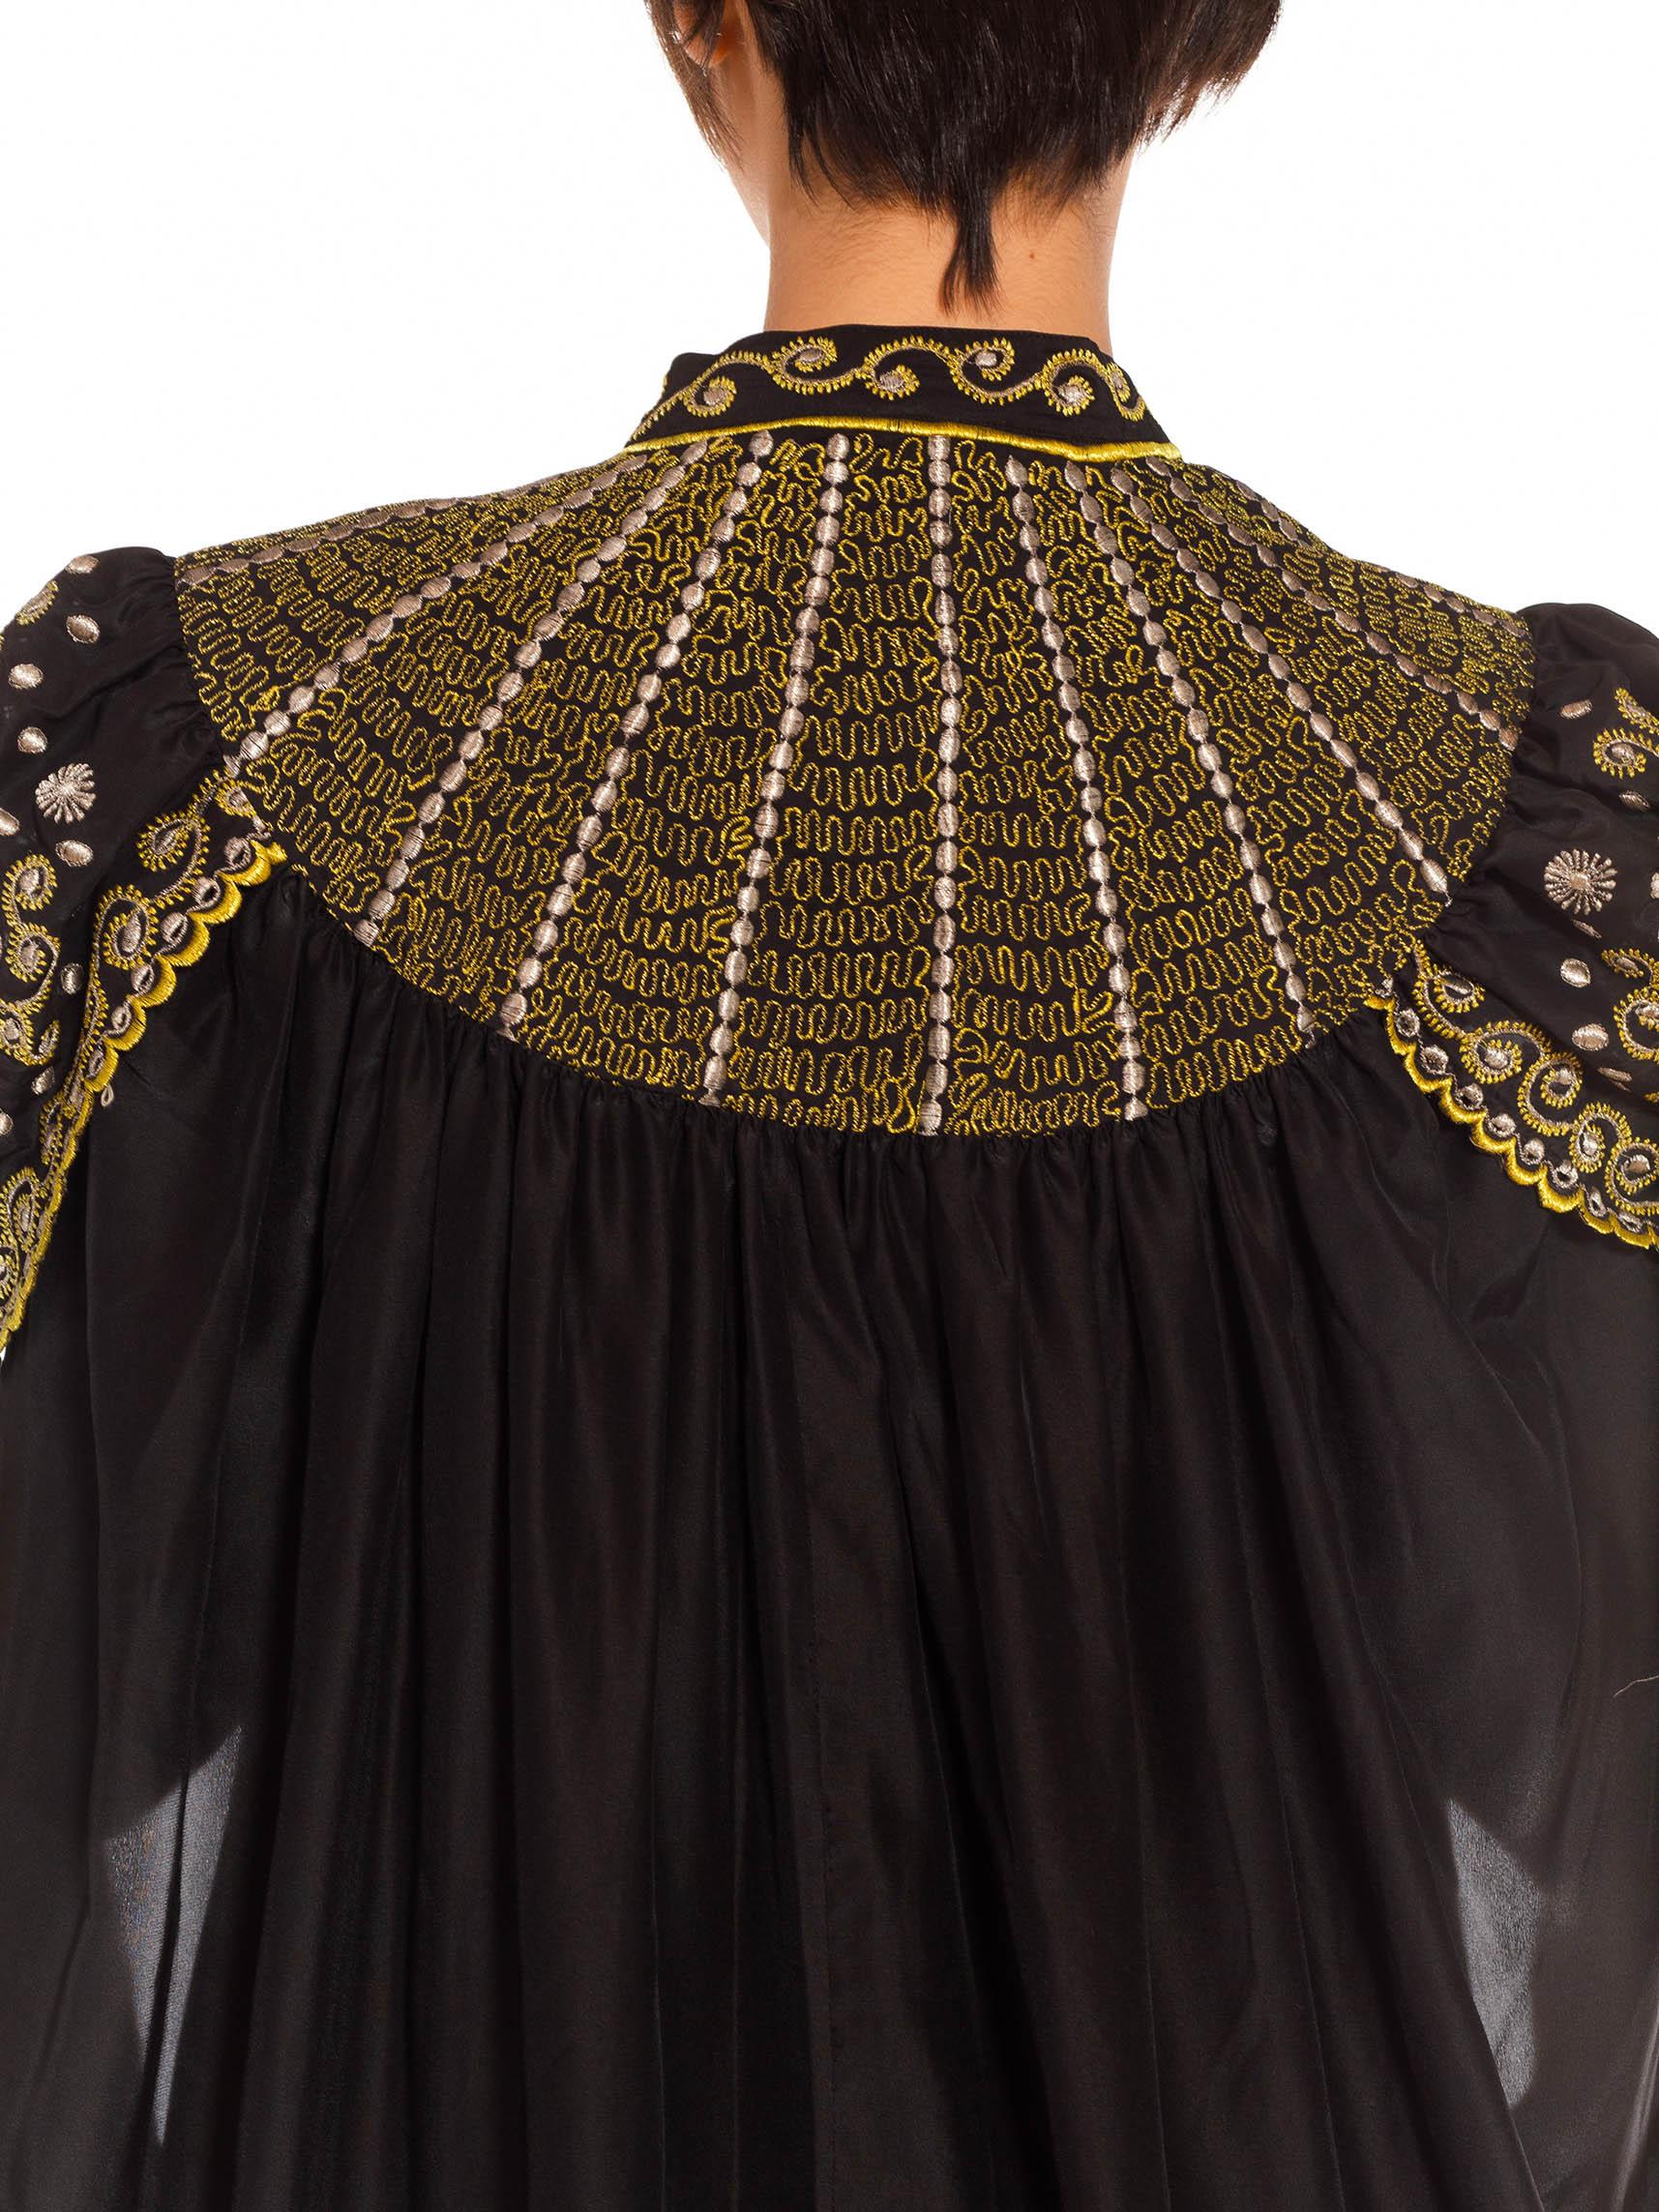 1970S Black Polyester Metallic Gold Embroidered Cape 6